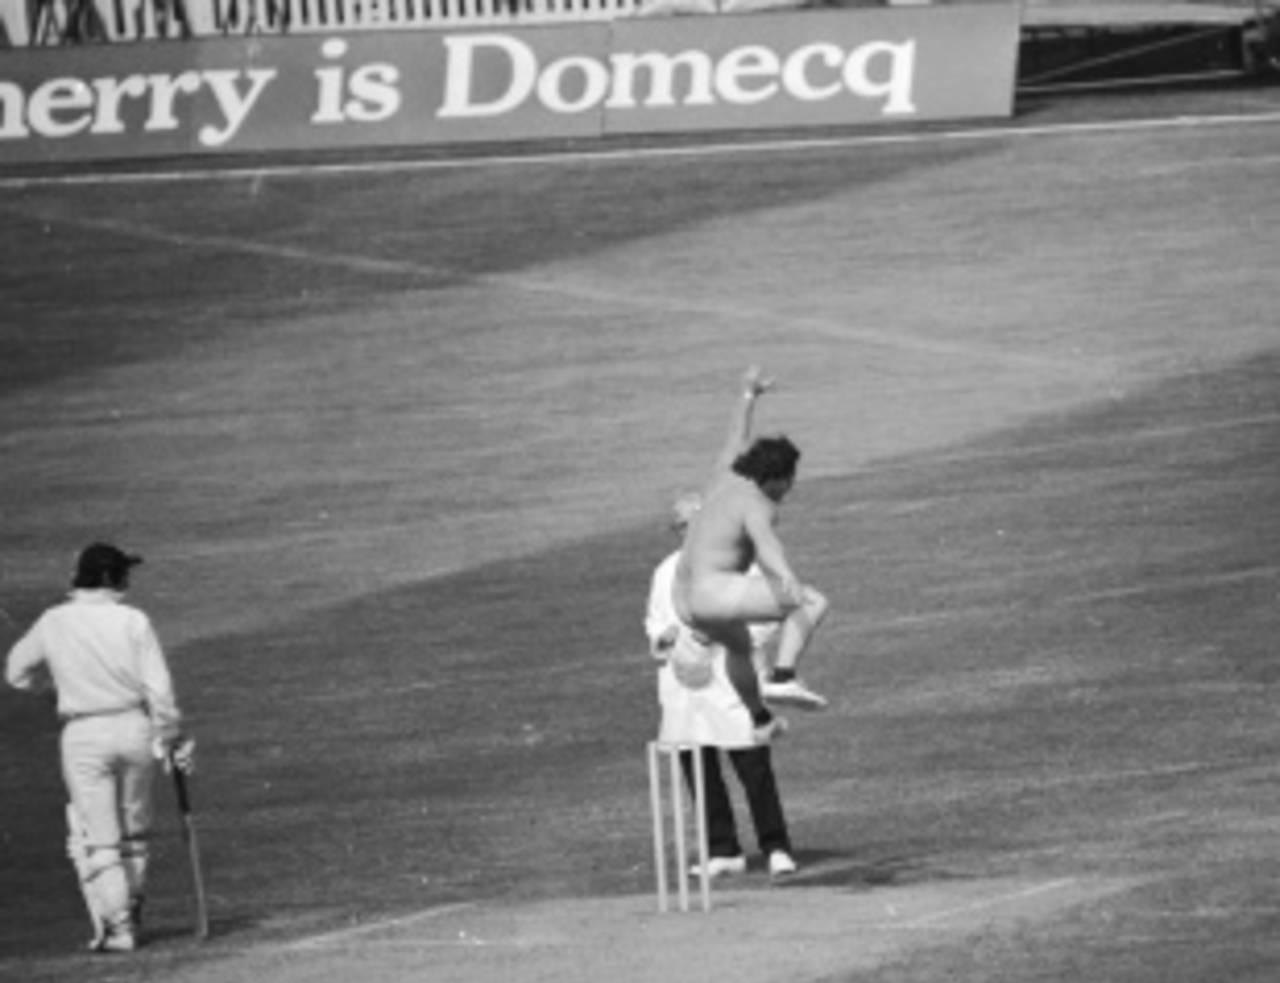 A streaker invades the pitch at Lord's, England v Australia, 2nd Test, Lord's, 4th day, August 4, 1975